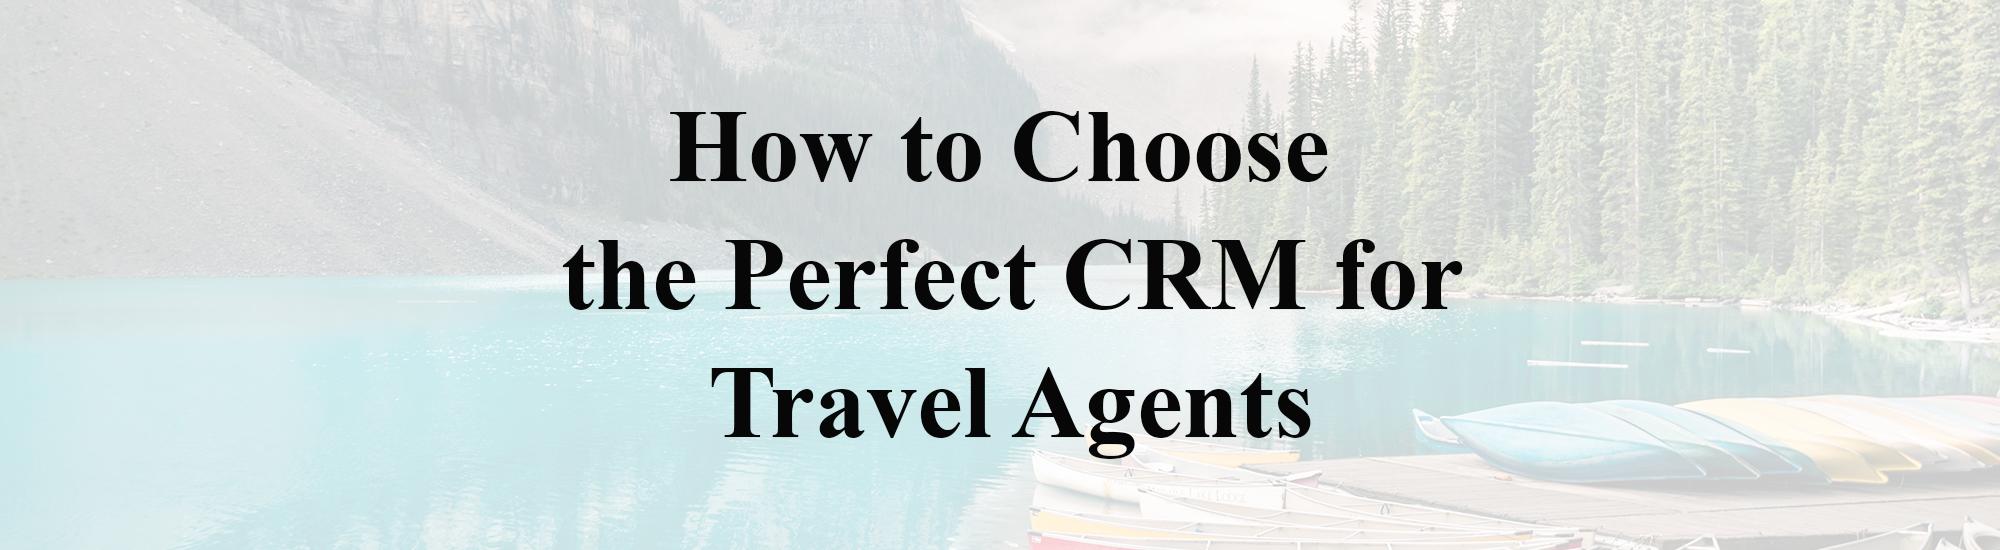 CRM for Travel Agents